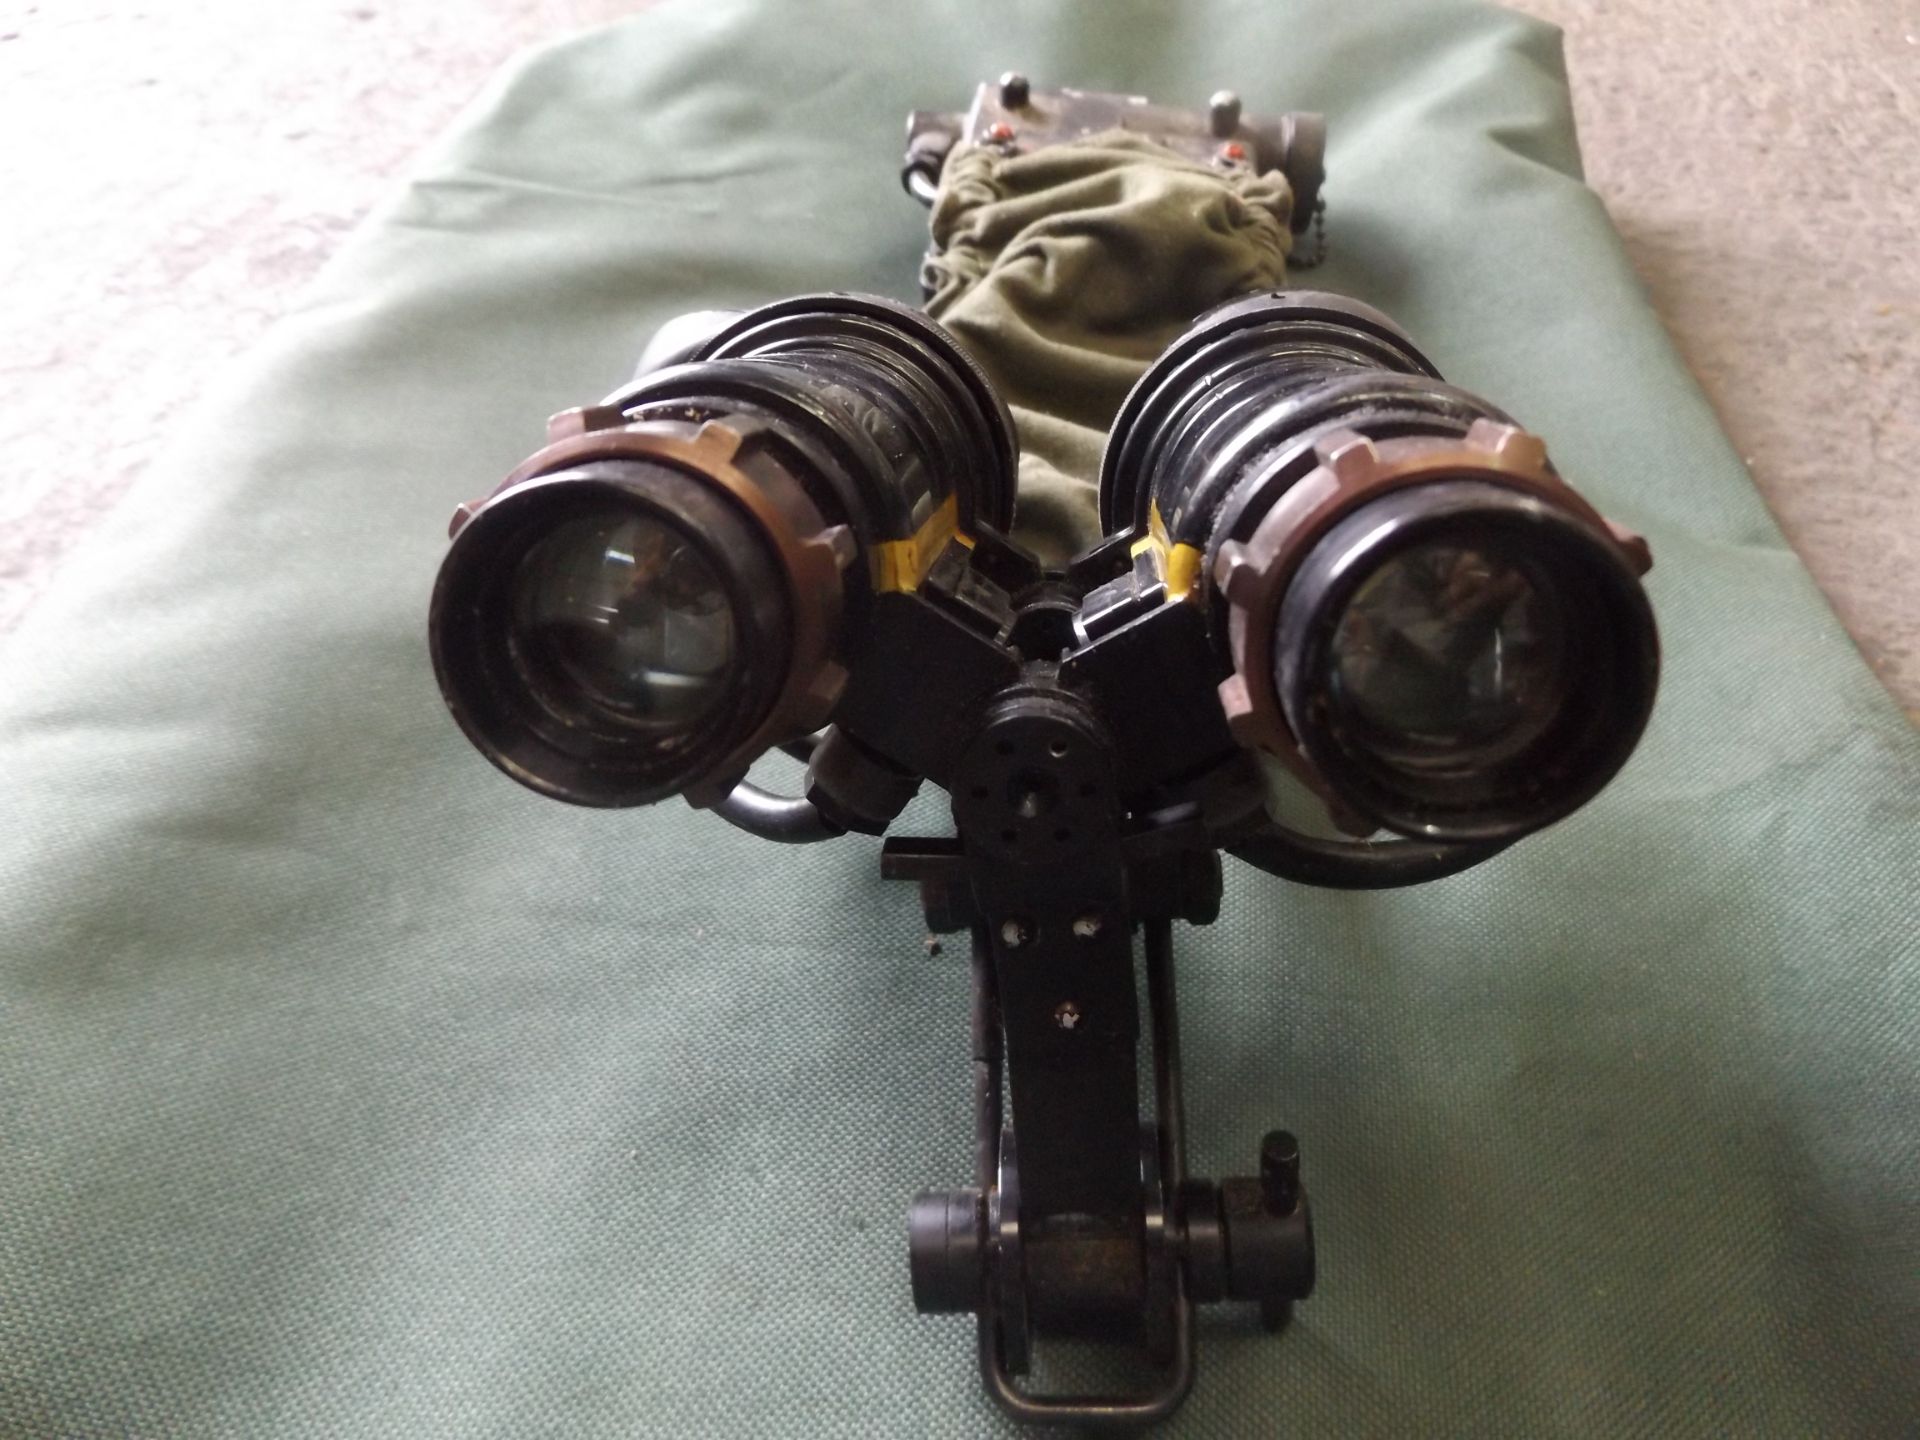 No.1 Mk.1 Night Vision Infa-Red Binoculars - Extremely Rare and Collectable - Image 3 of 9